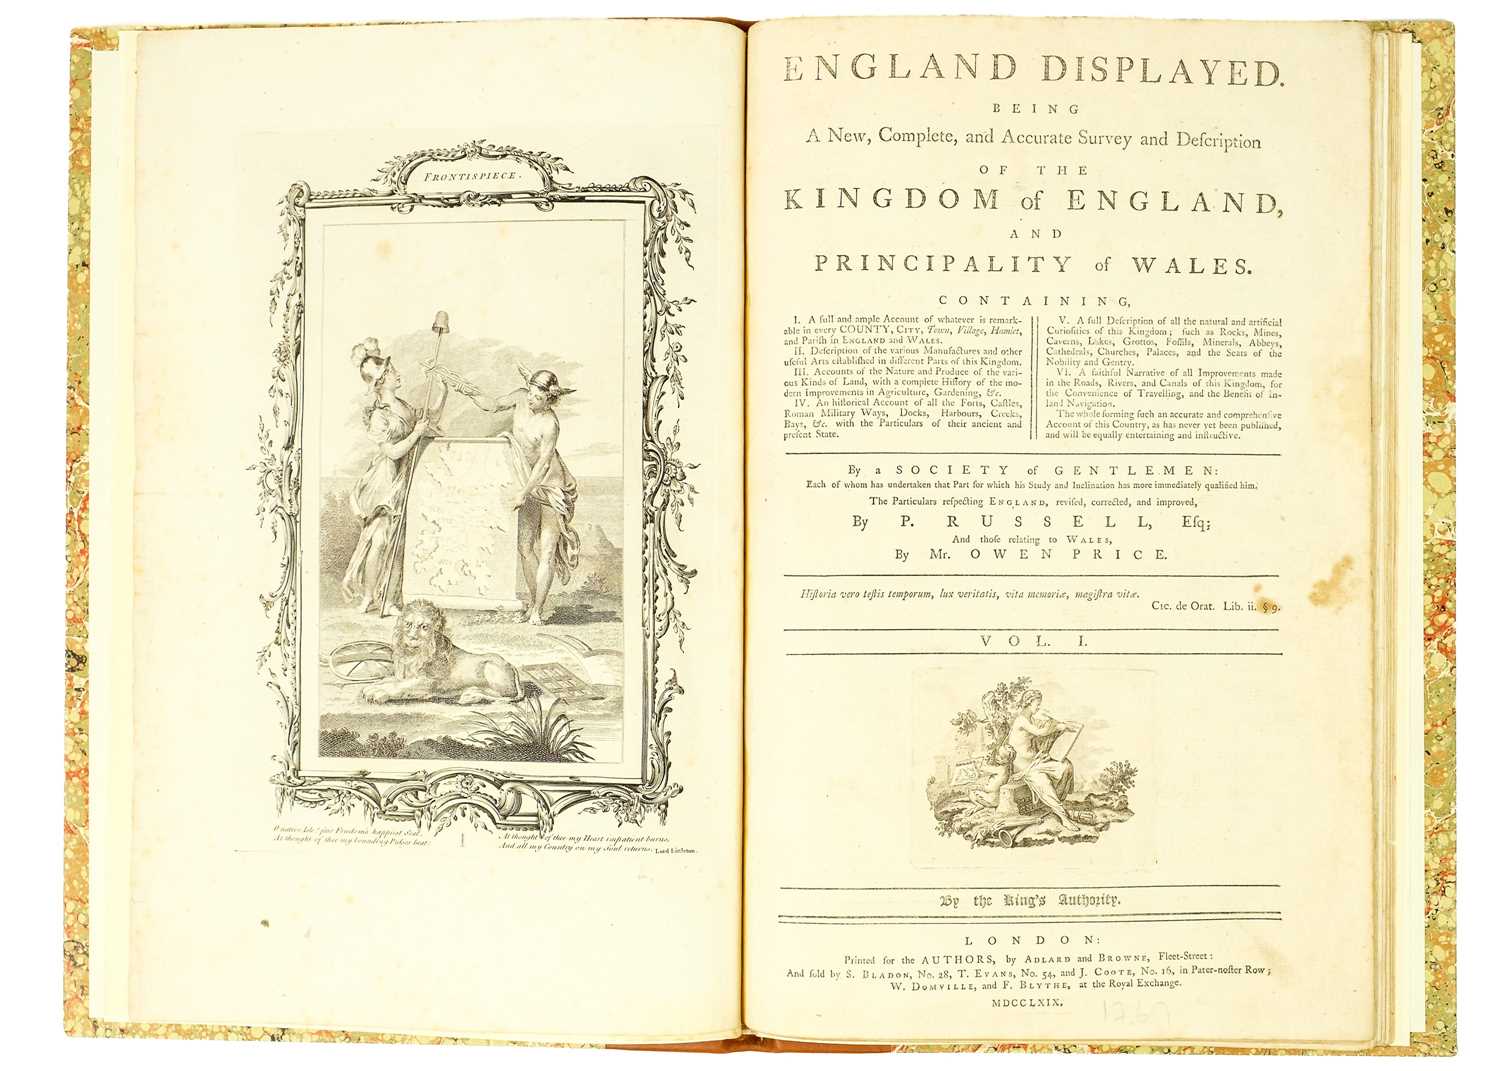 P. R. Russell (relating to England) Owen Price (relating to Wales) 'England Displayed. Being a New C - Image 4 of 13